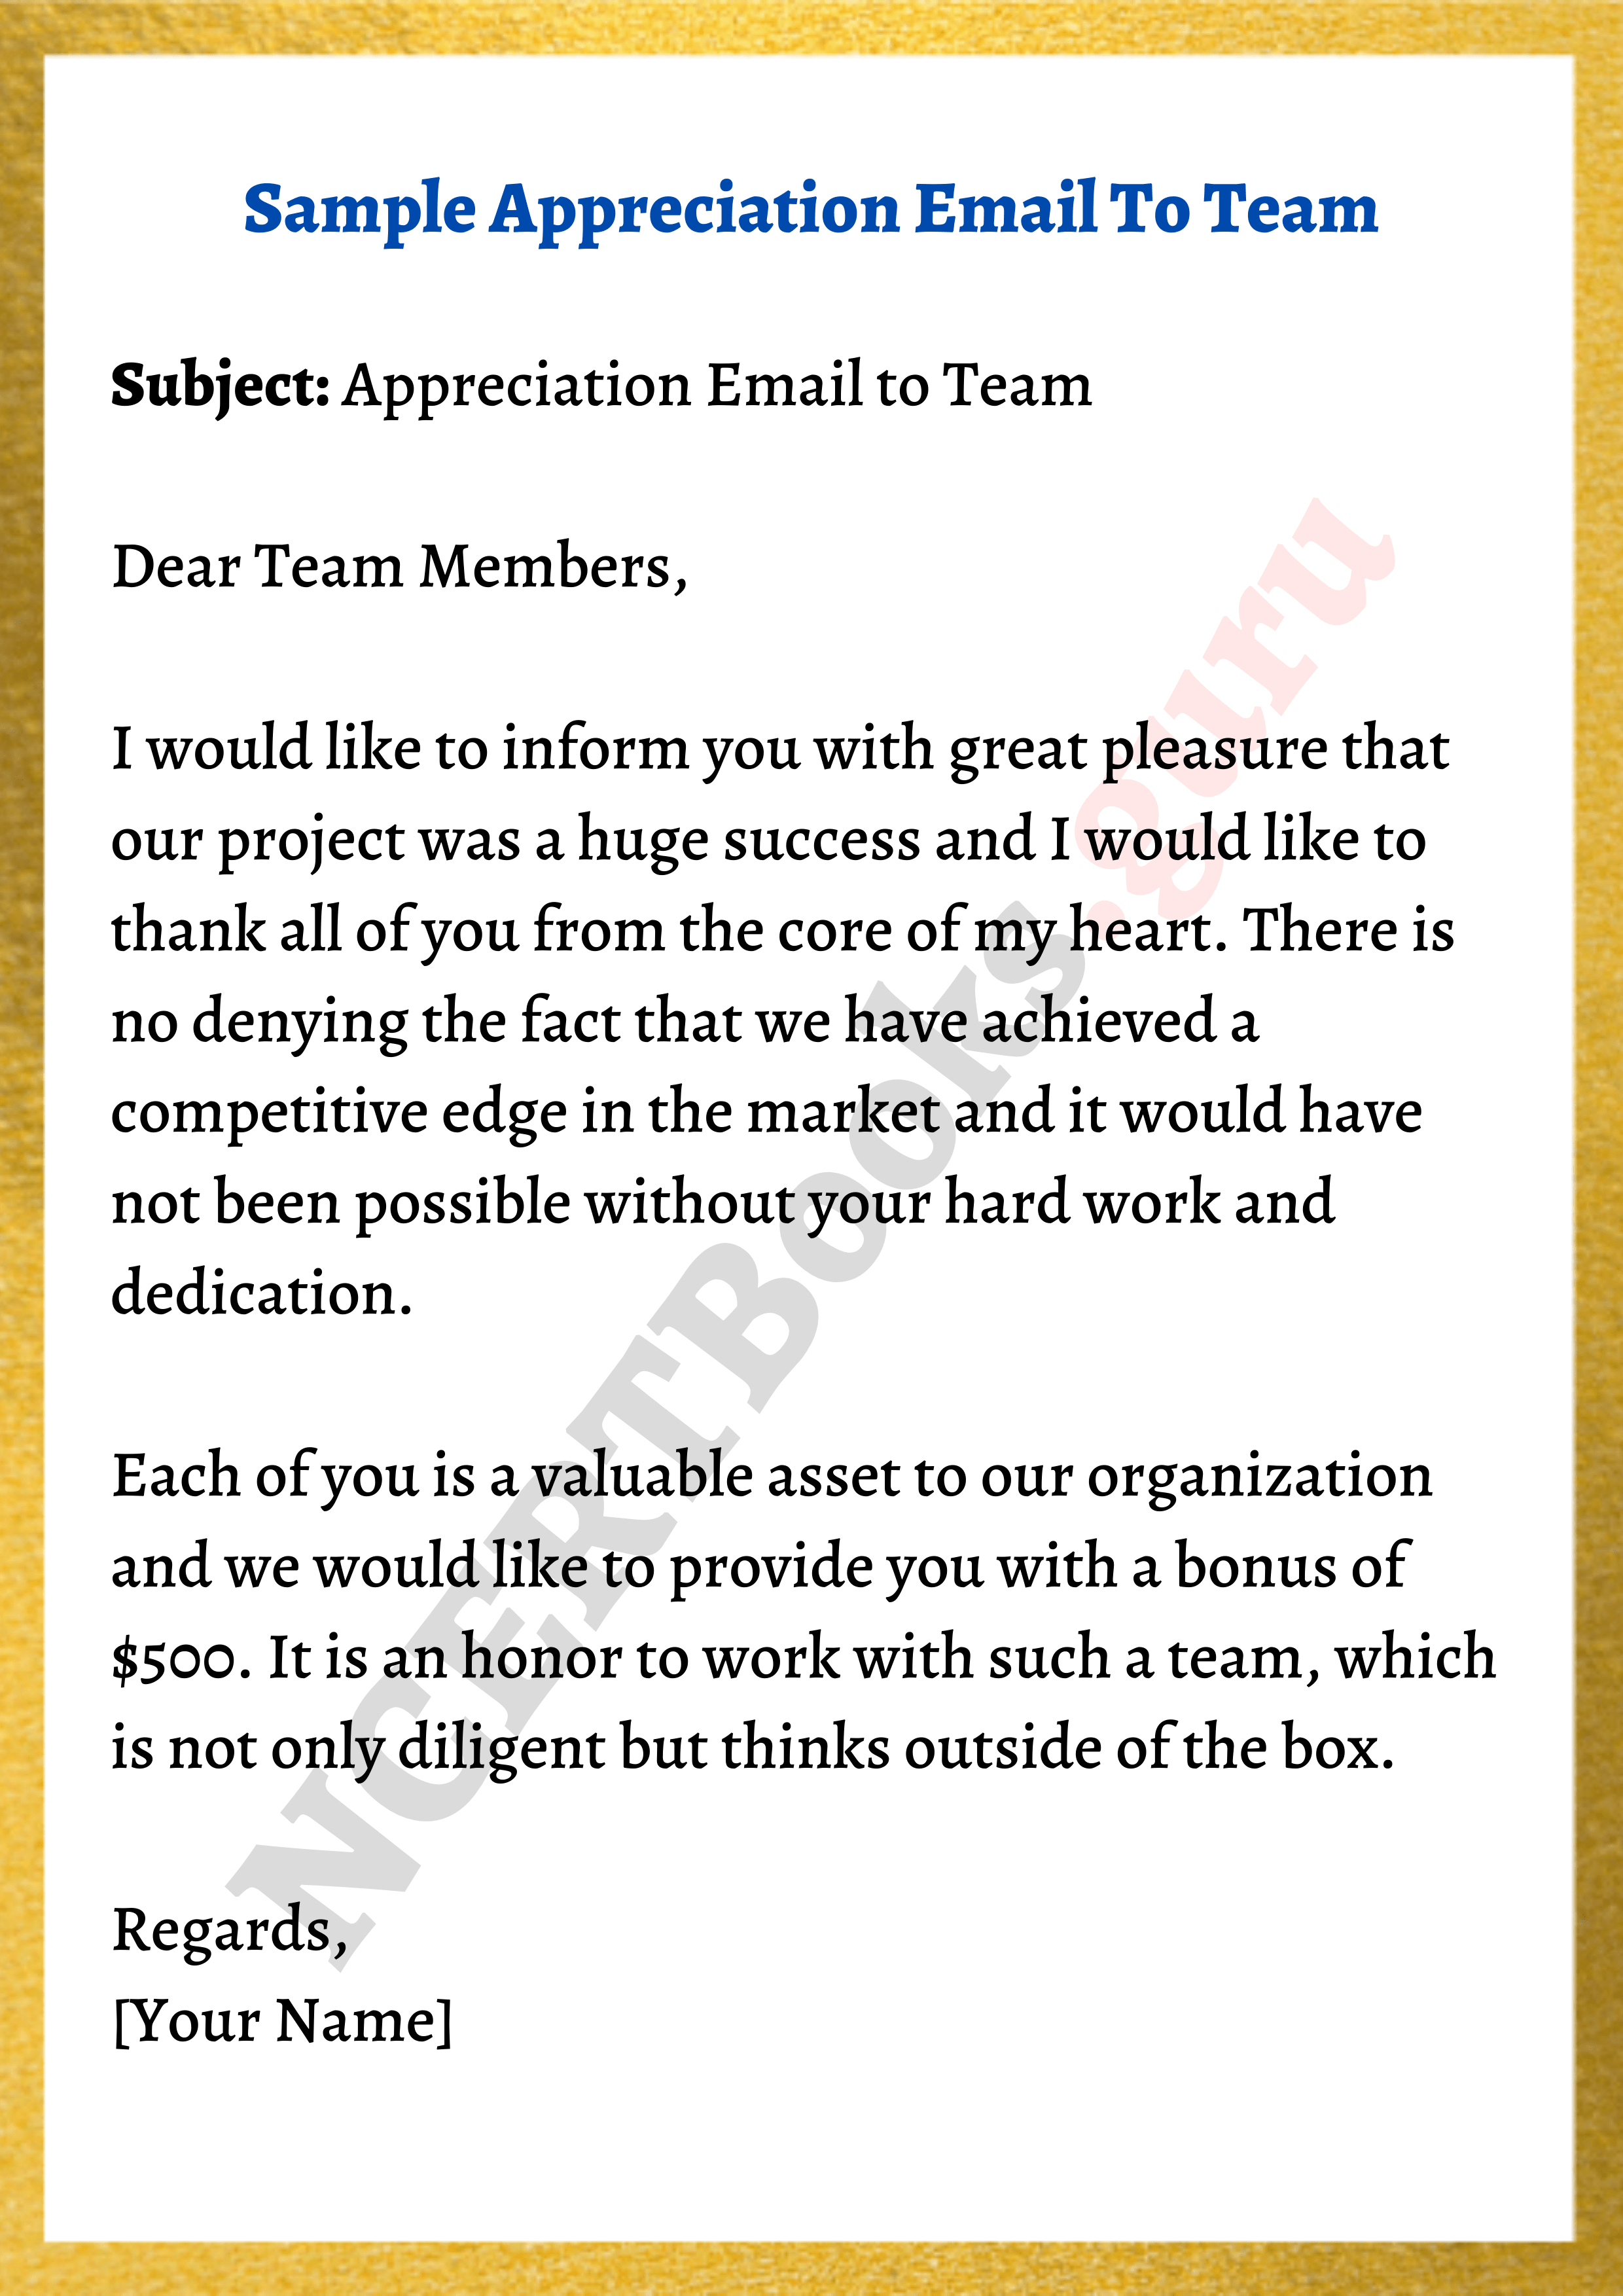 sample letter of appreciation to team via email